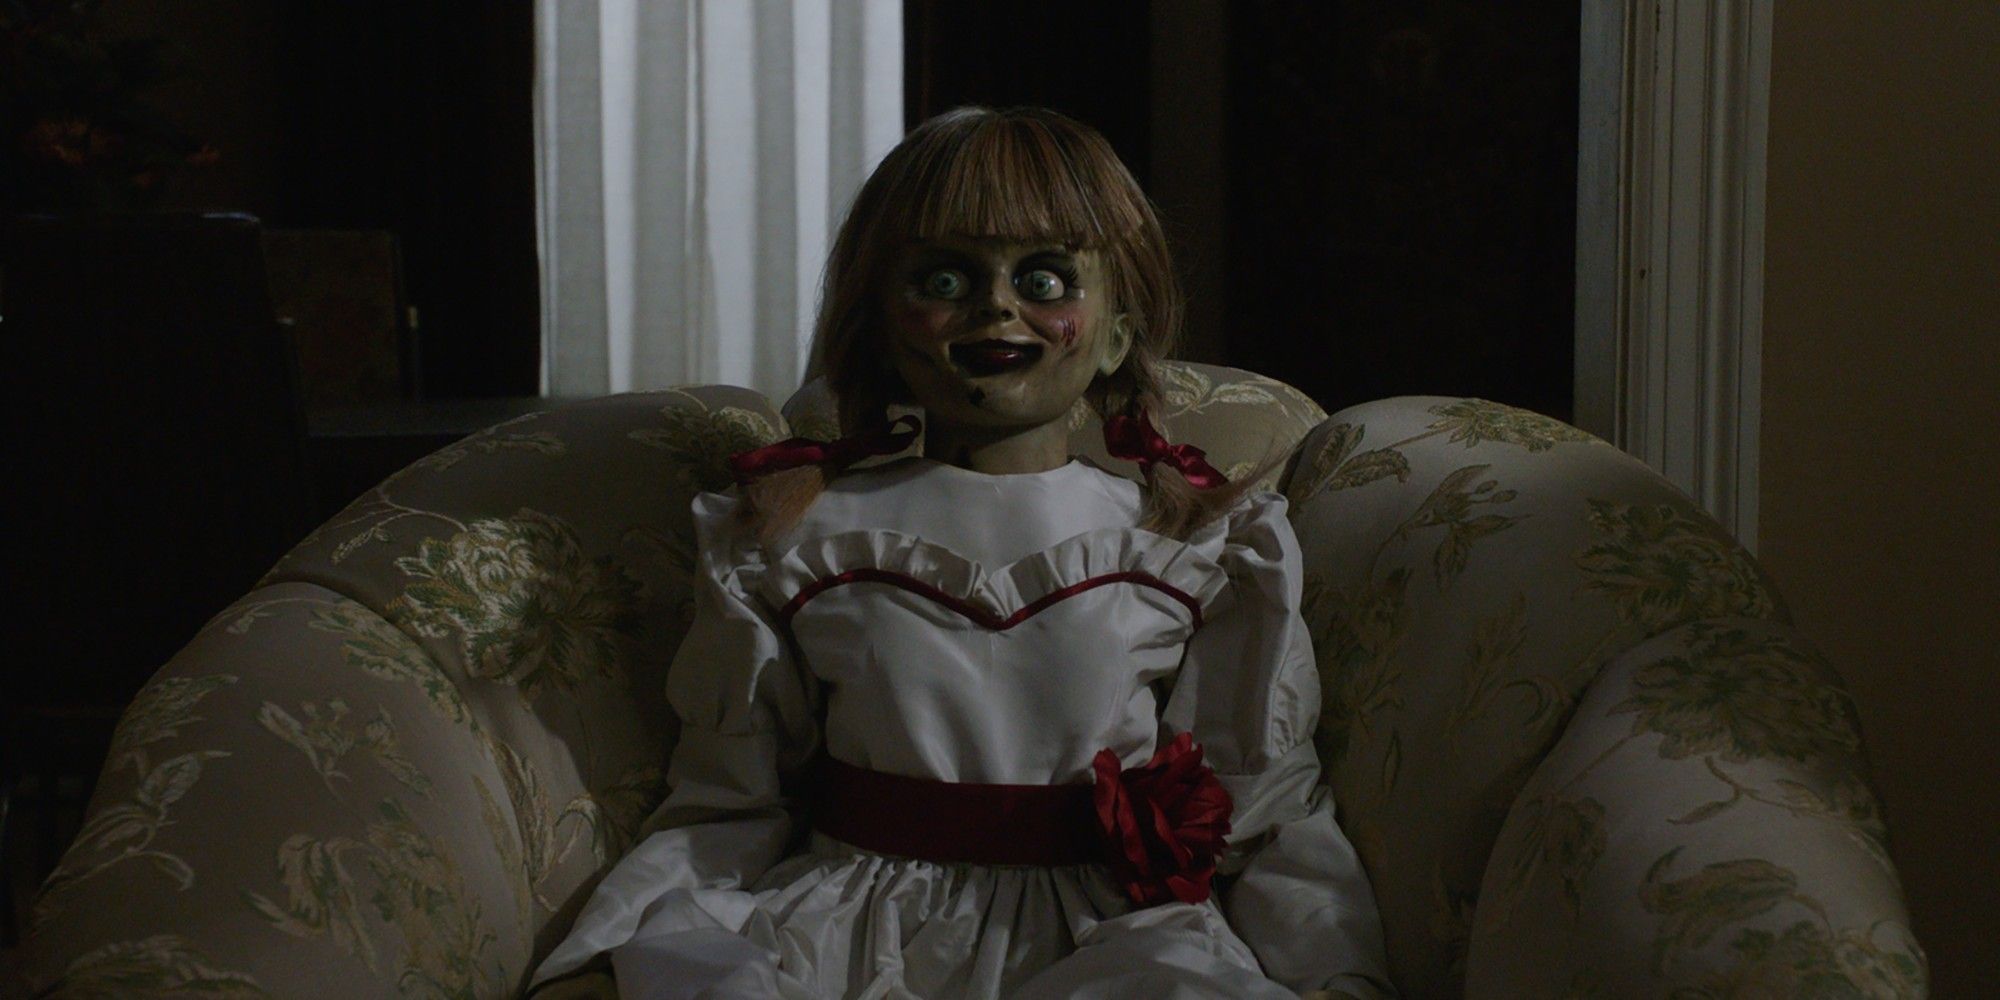 6 Things The Conjuring Series Does Better Than Annabelle (& 4 It Doesn’t)